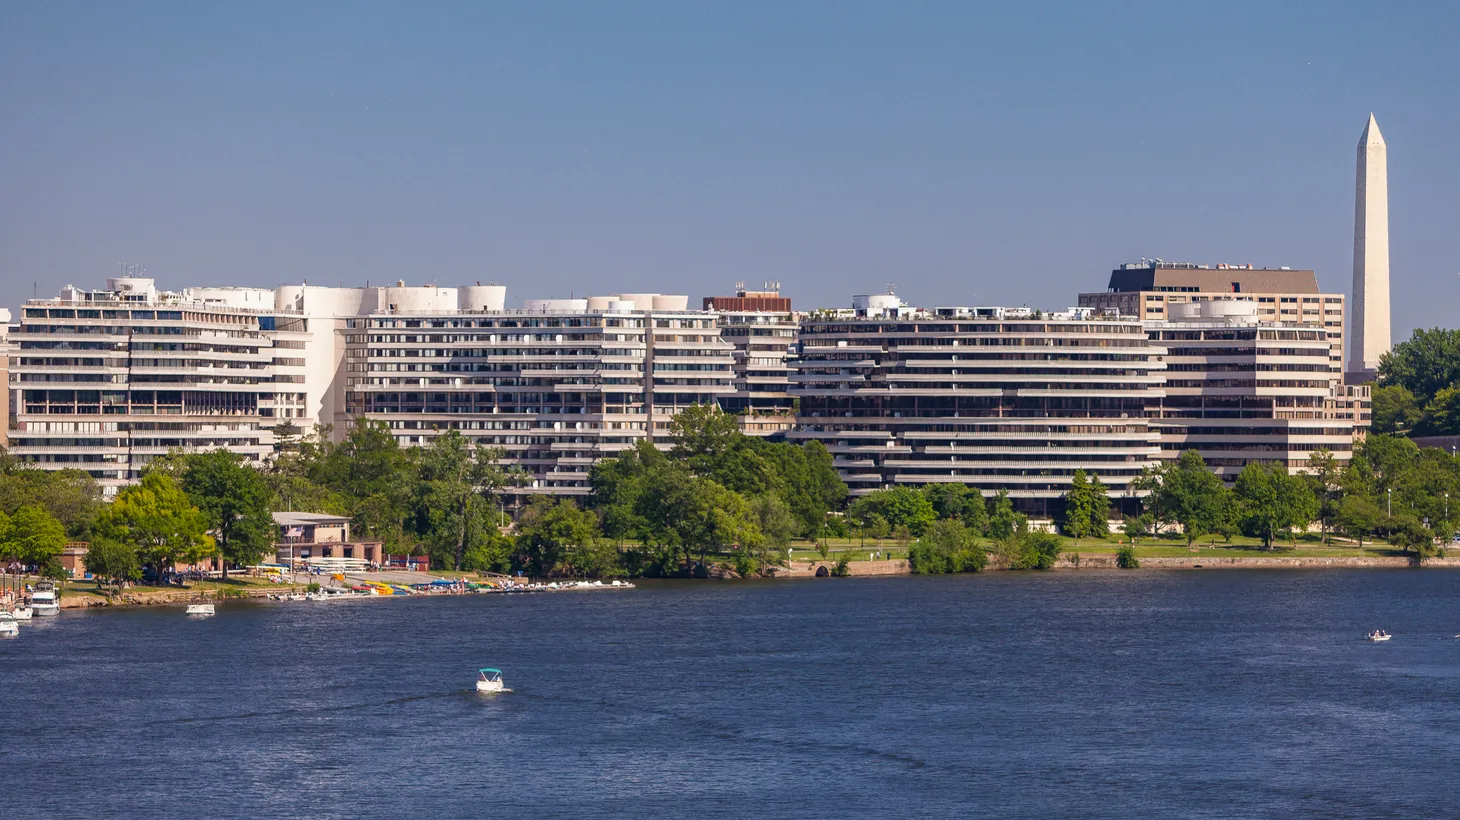 The Watergate hotel and condominium complex is located near the Potomac River in Washington, District of Columbia. A 1972 break-in at Watergate eventually resulted in the resignation of President Richard Nixon.